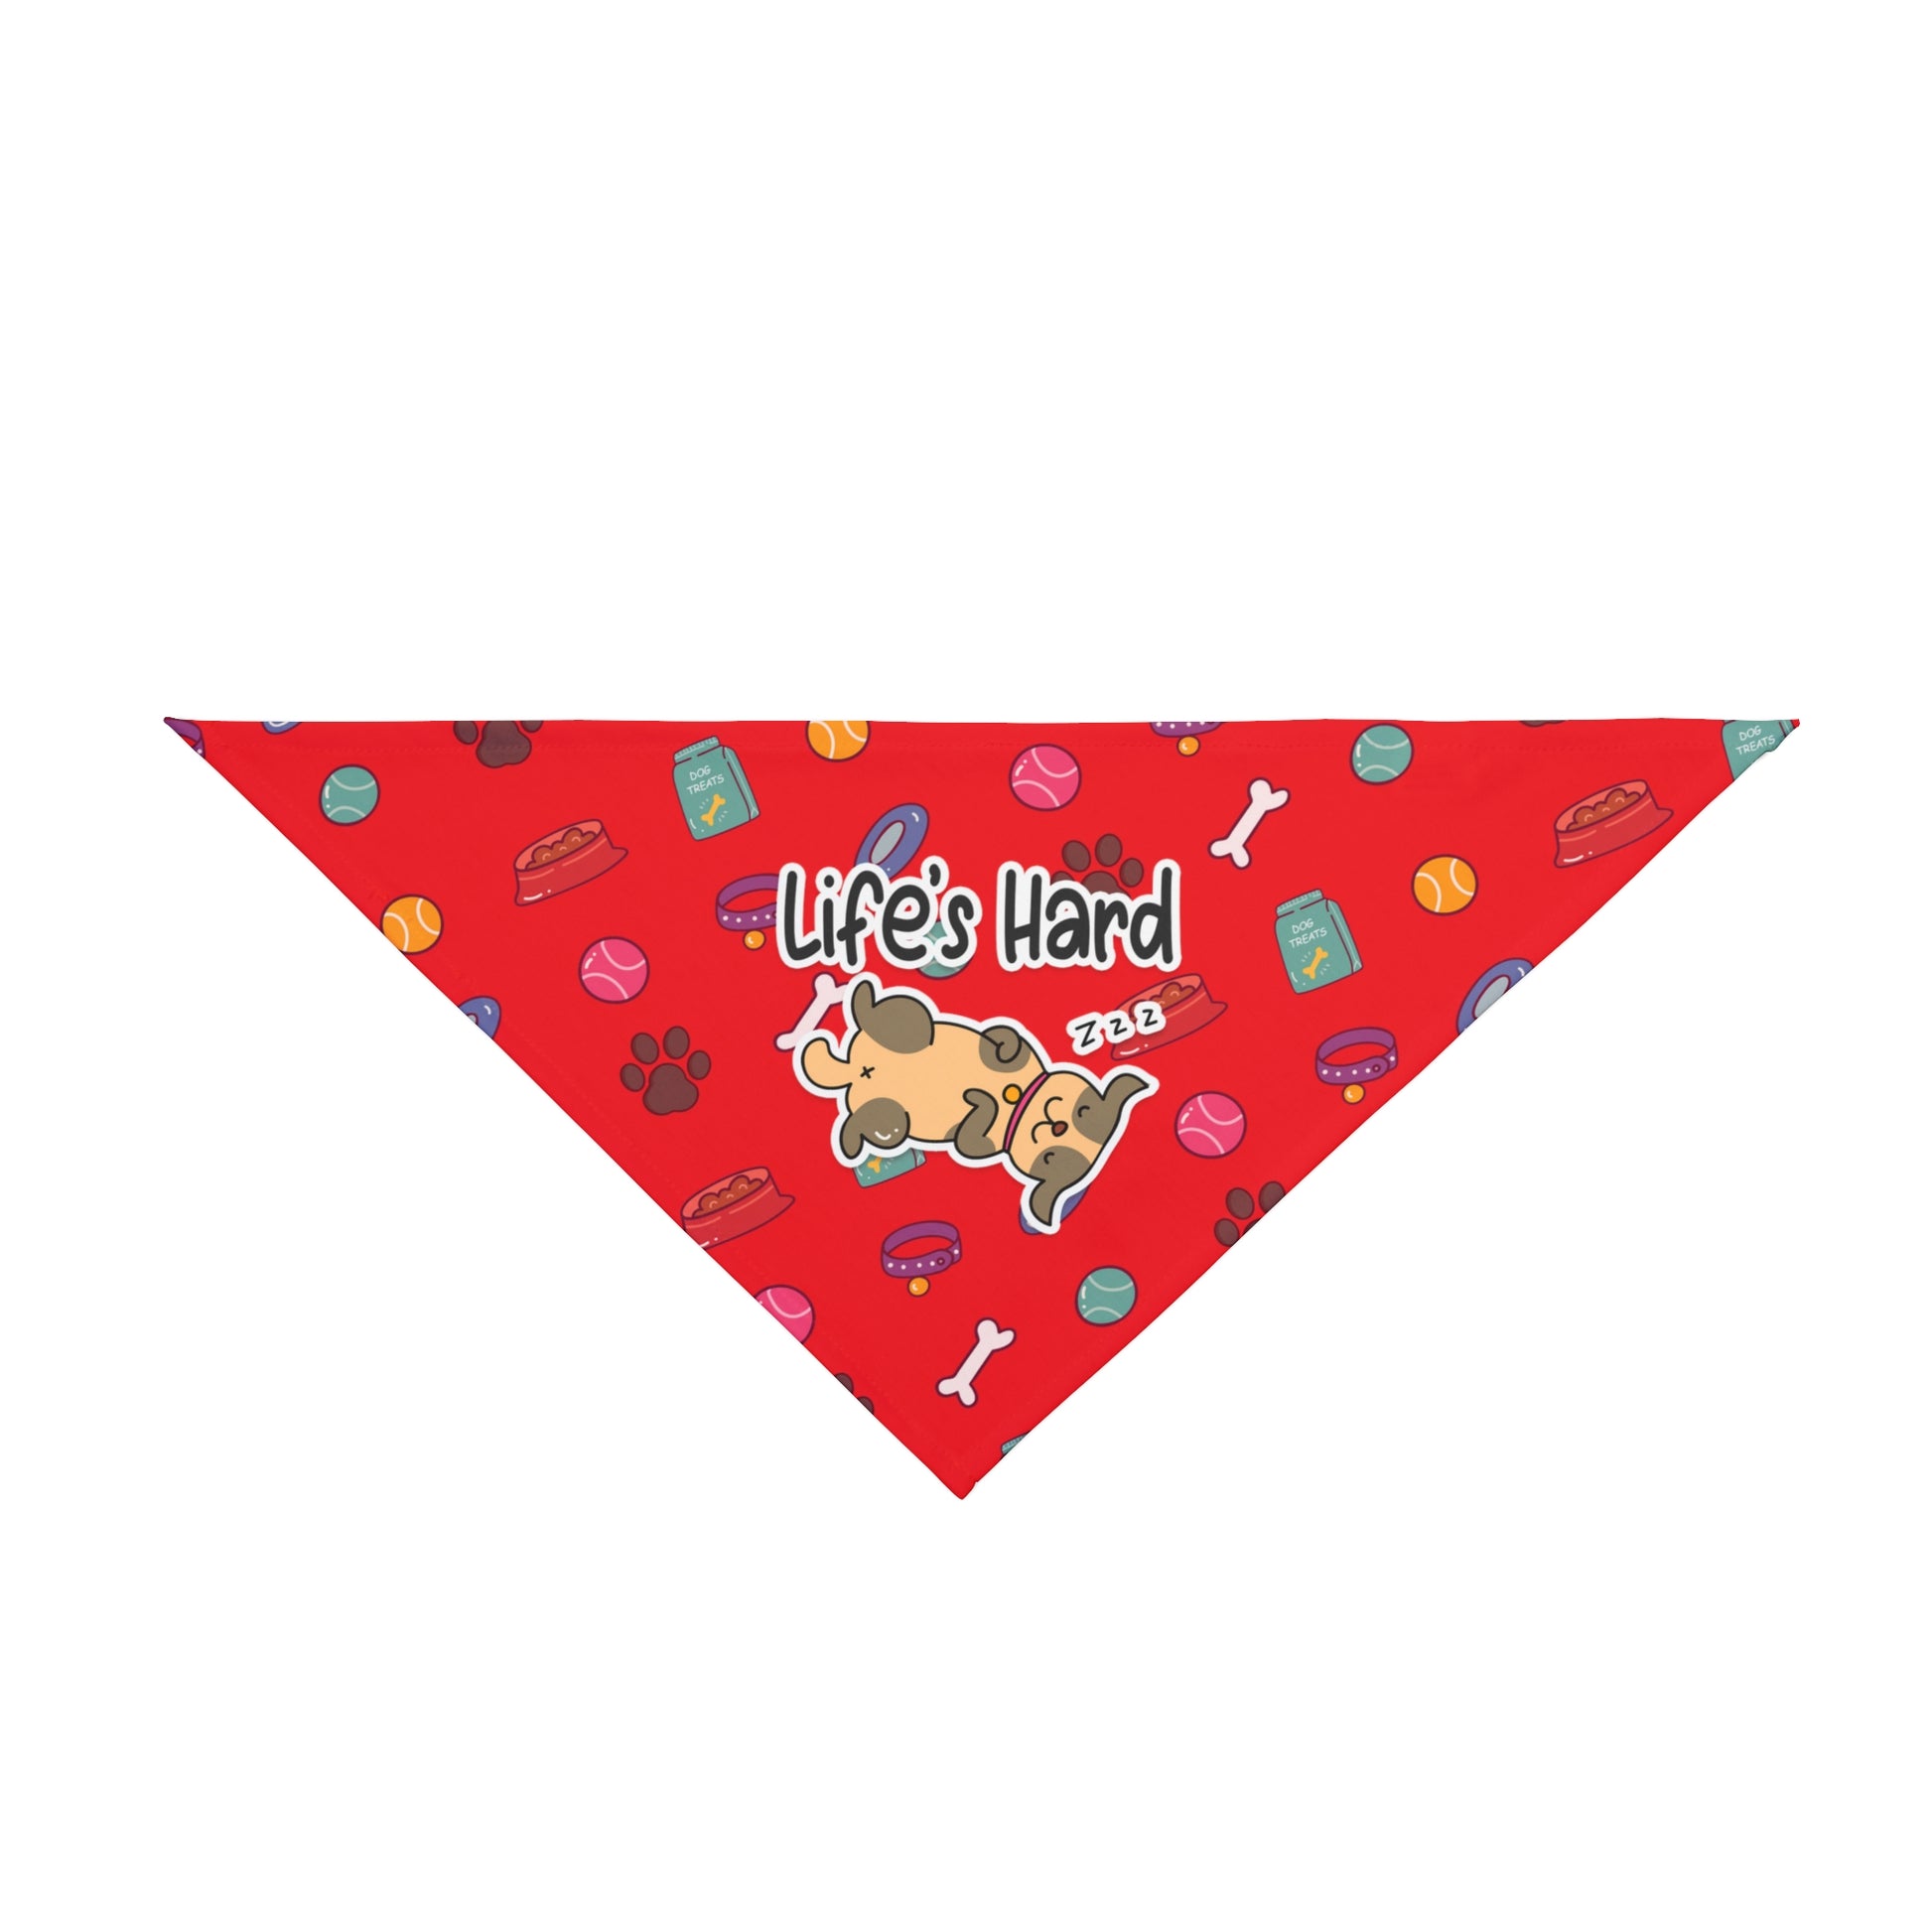 A pet bandana with a beautiful pattern design featuring all things dog love. A smiling dog sleeping below a message that says "Life's hard". Bandana's Color is red